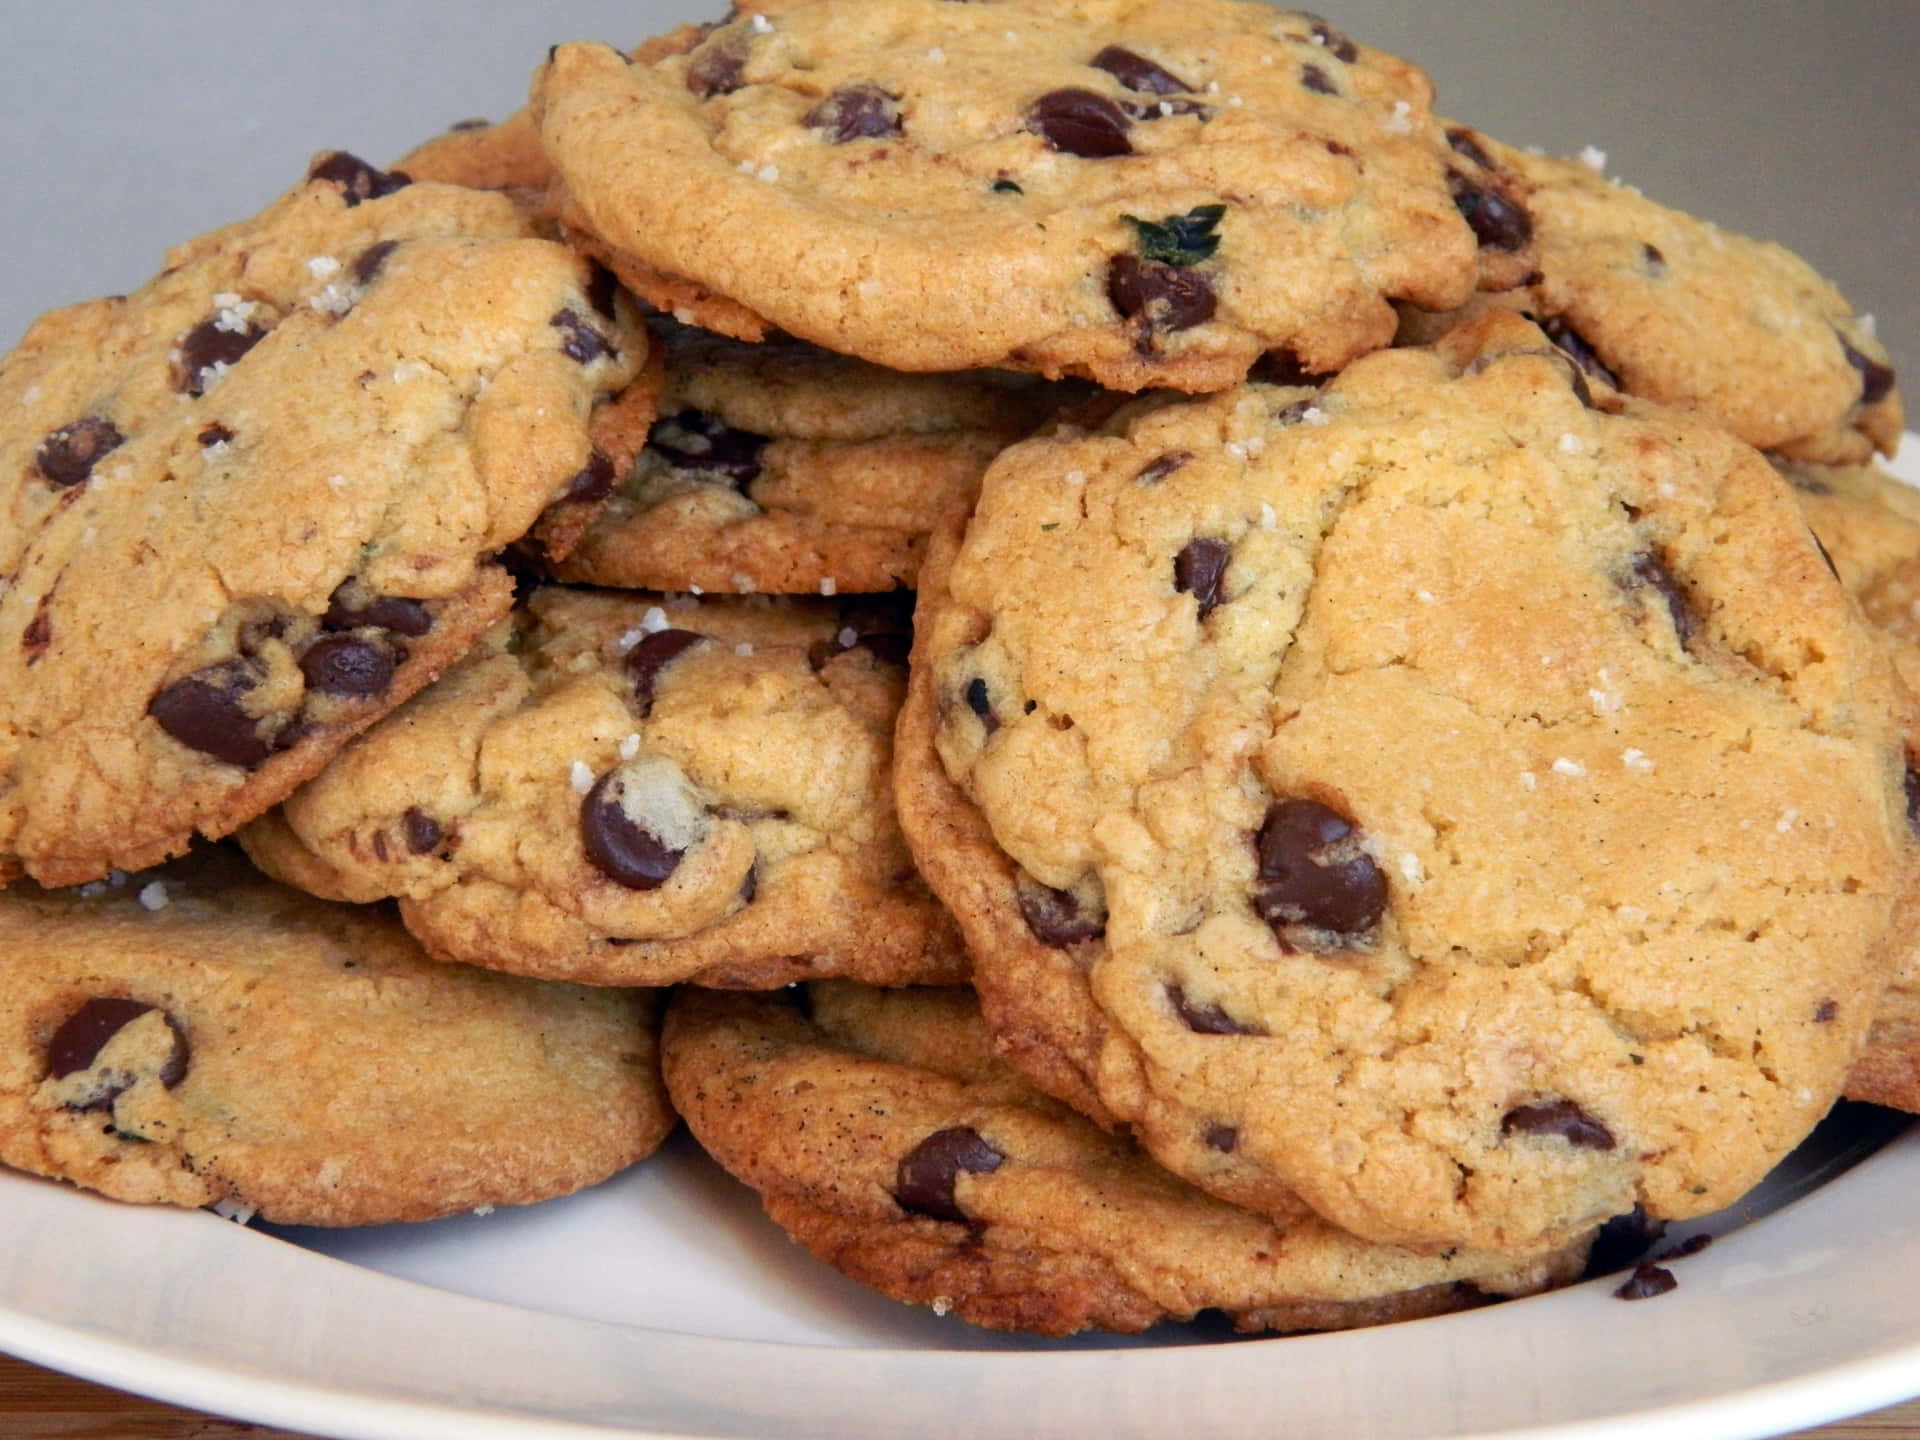 Delicious Chocolate Chip Cookies!